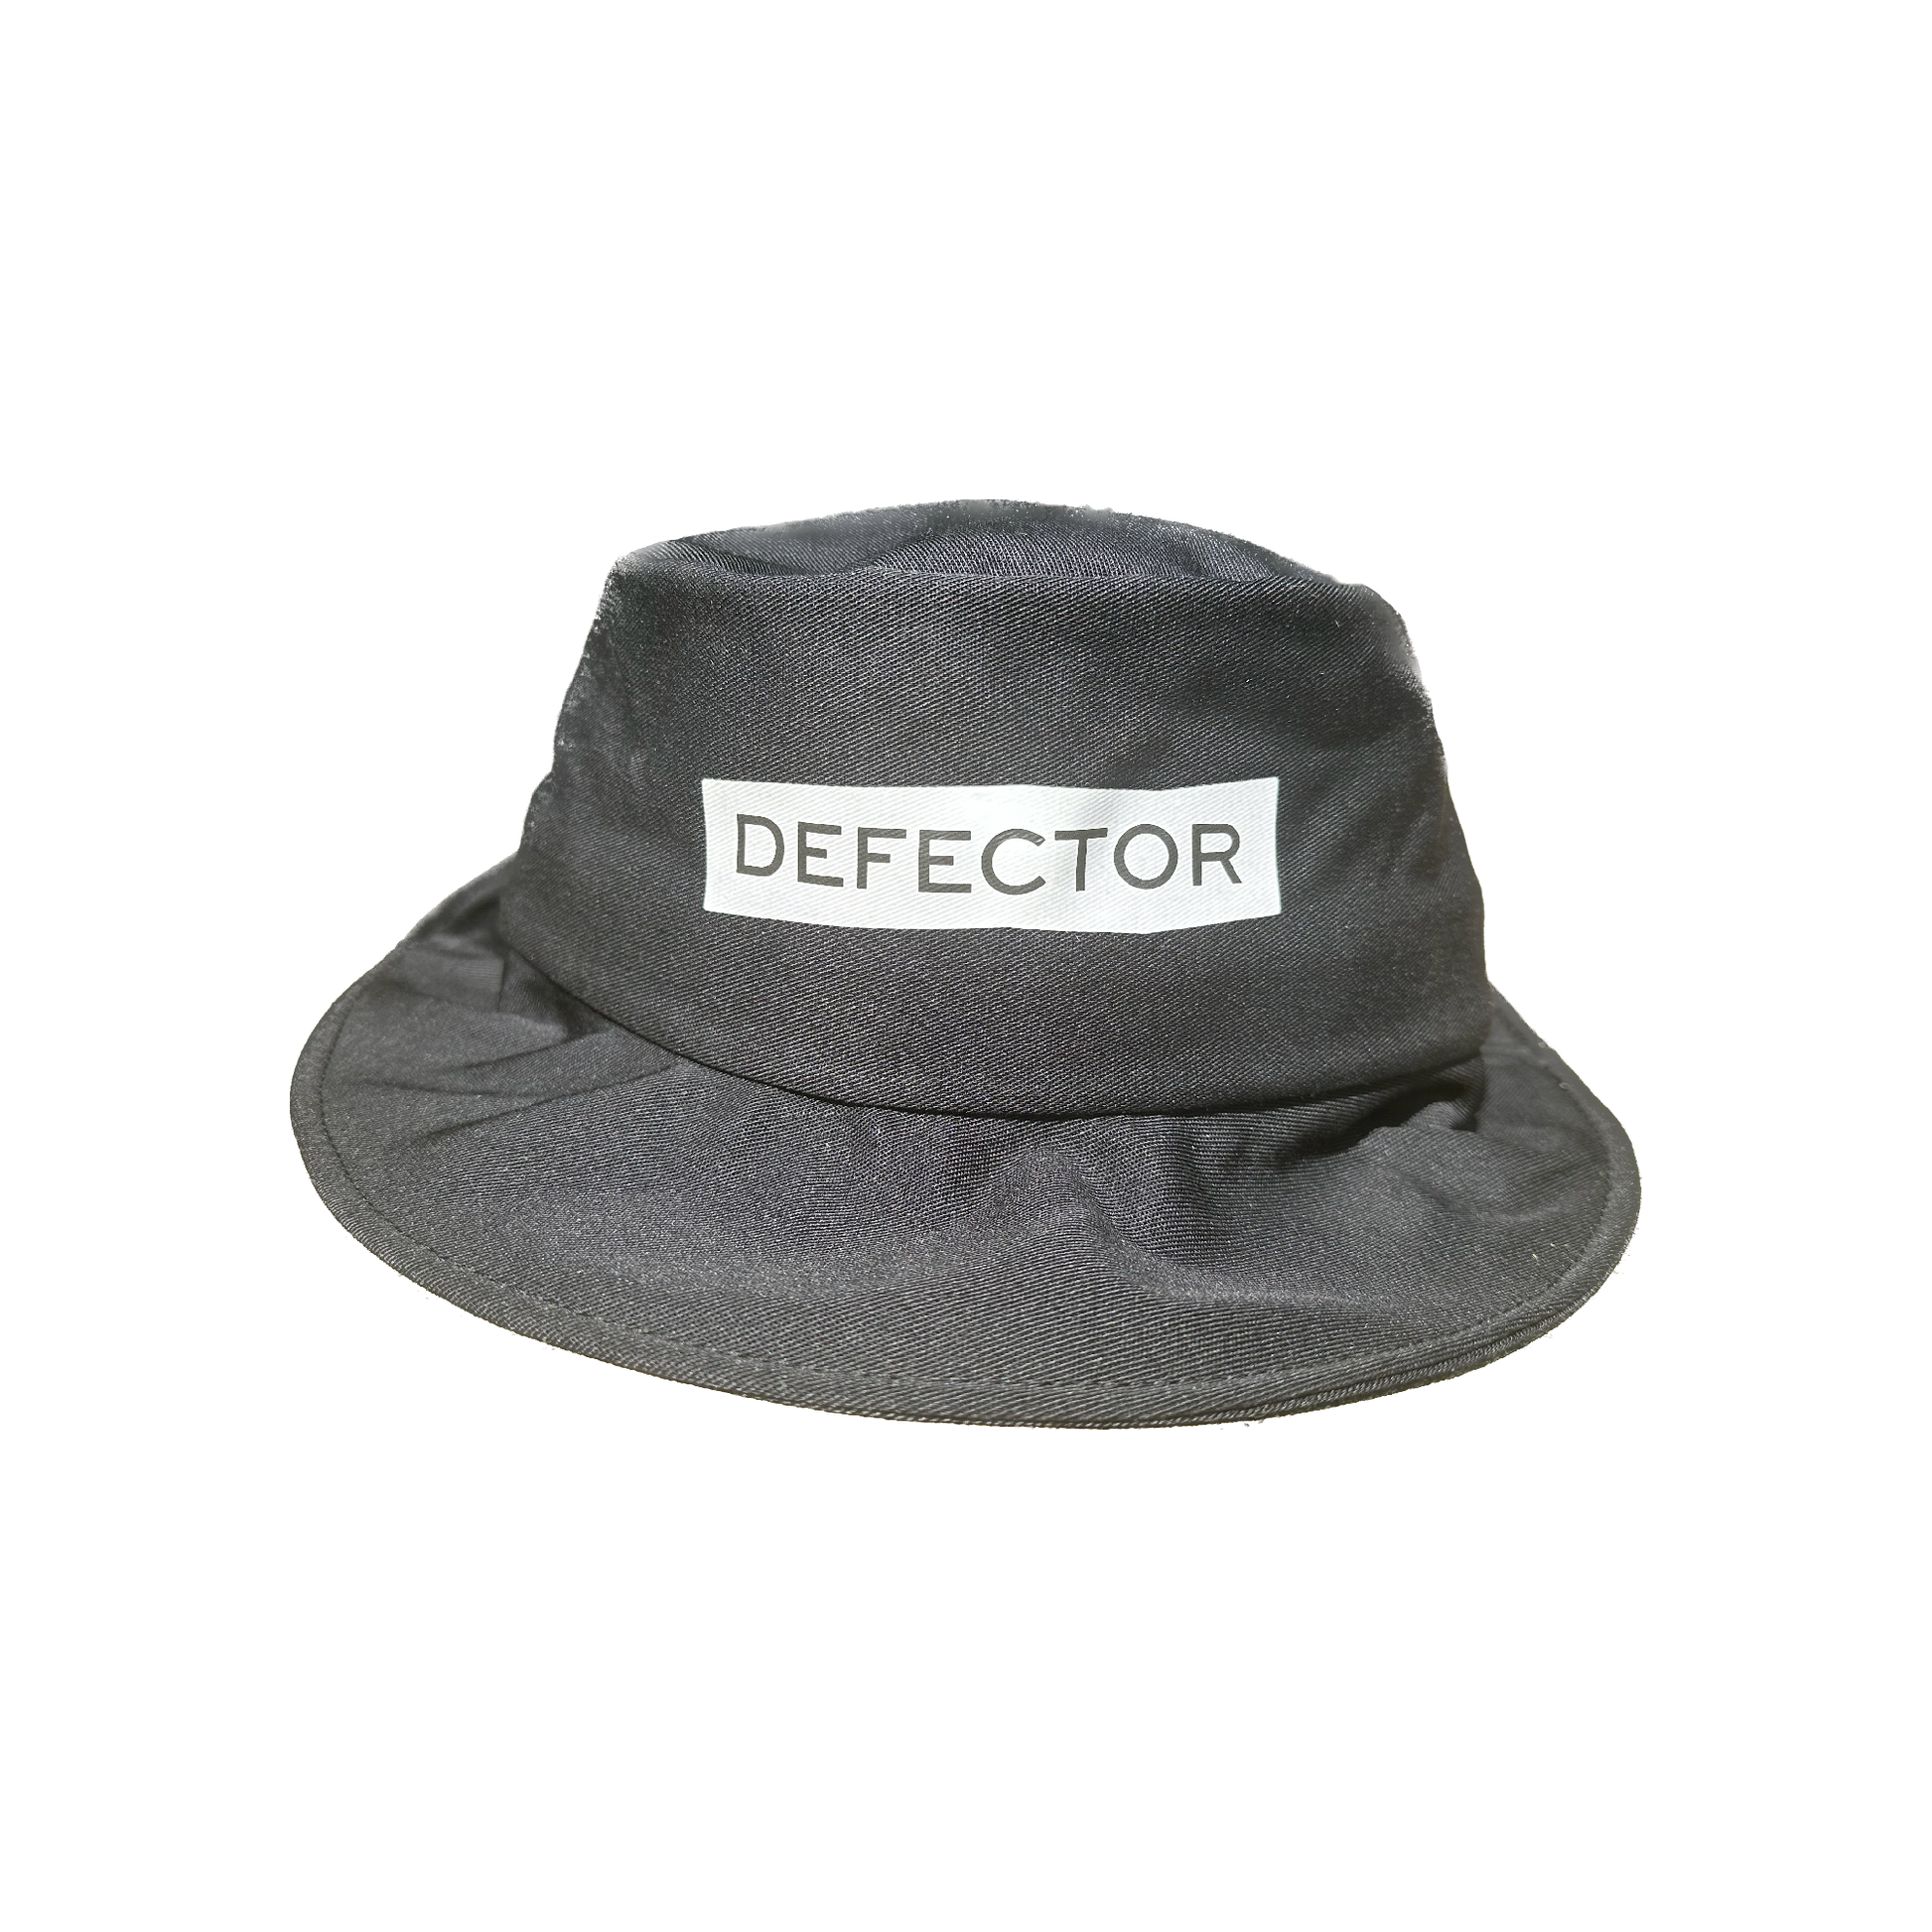 All black bucket hat with Defector logo in white on the center of it, printed.